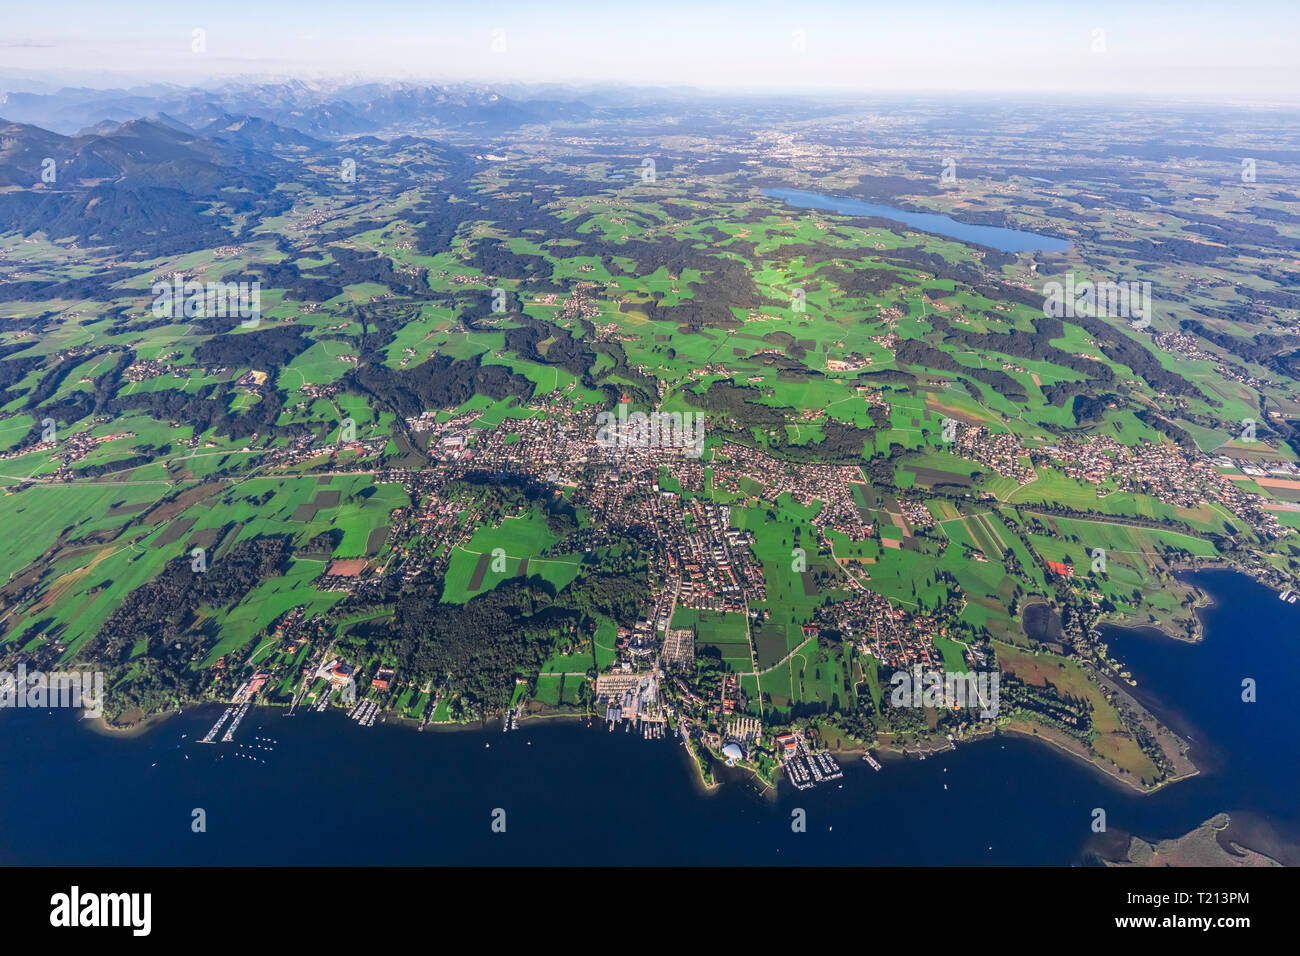 Germany, Bavaria, Aerial view of Lake Chiemsee, Prien, Rimsting and Schafwaschener Winkel in the foreground. Rosenheim and Simsee in the background Stock Photo